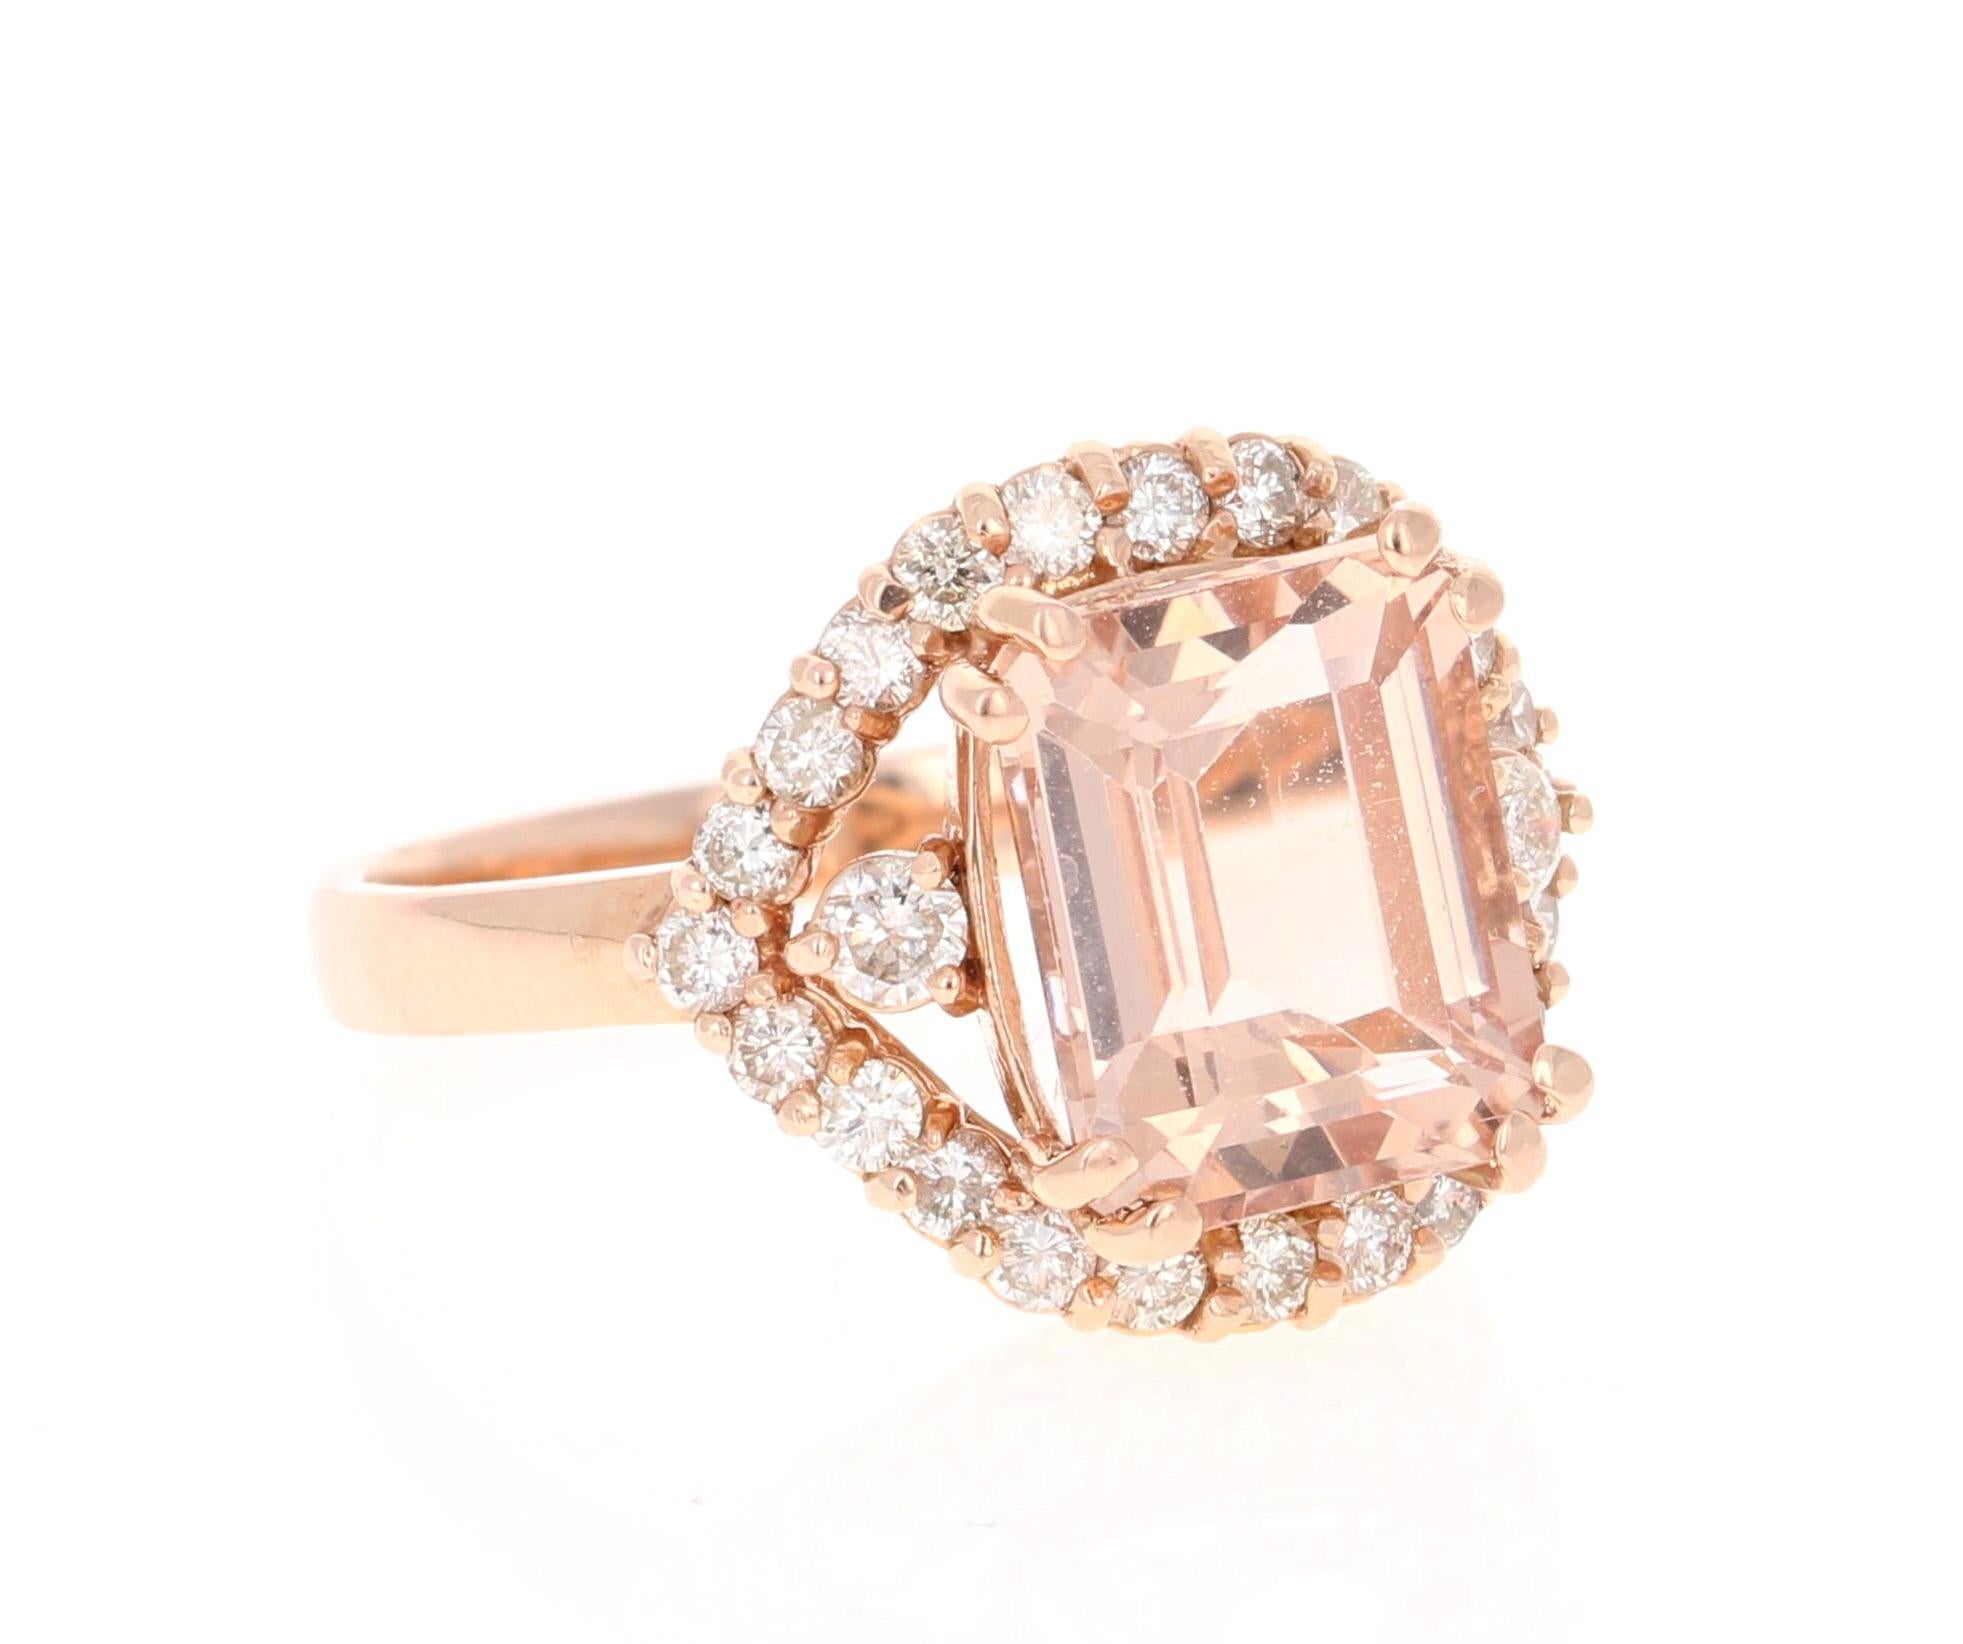 Statement Morganite Diamond Ring! 

This Morganite ring has a 4.33 Carat Emerald Cut Morganite and is surrounded by 26 Round Cut Diamonds that weigh 0.74 Carats. The total carat weight of the ring is 5.07 Carats.  

The Morganite is 11 mm x 10 mm